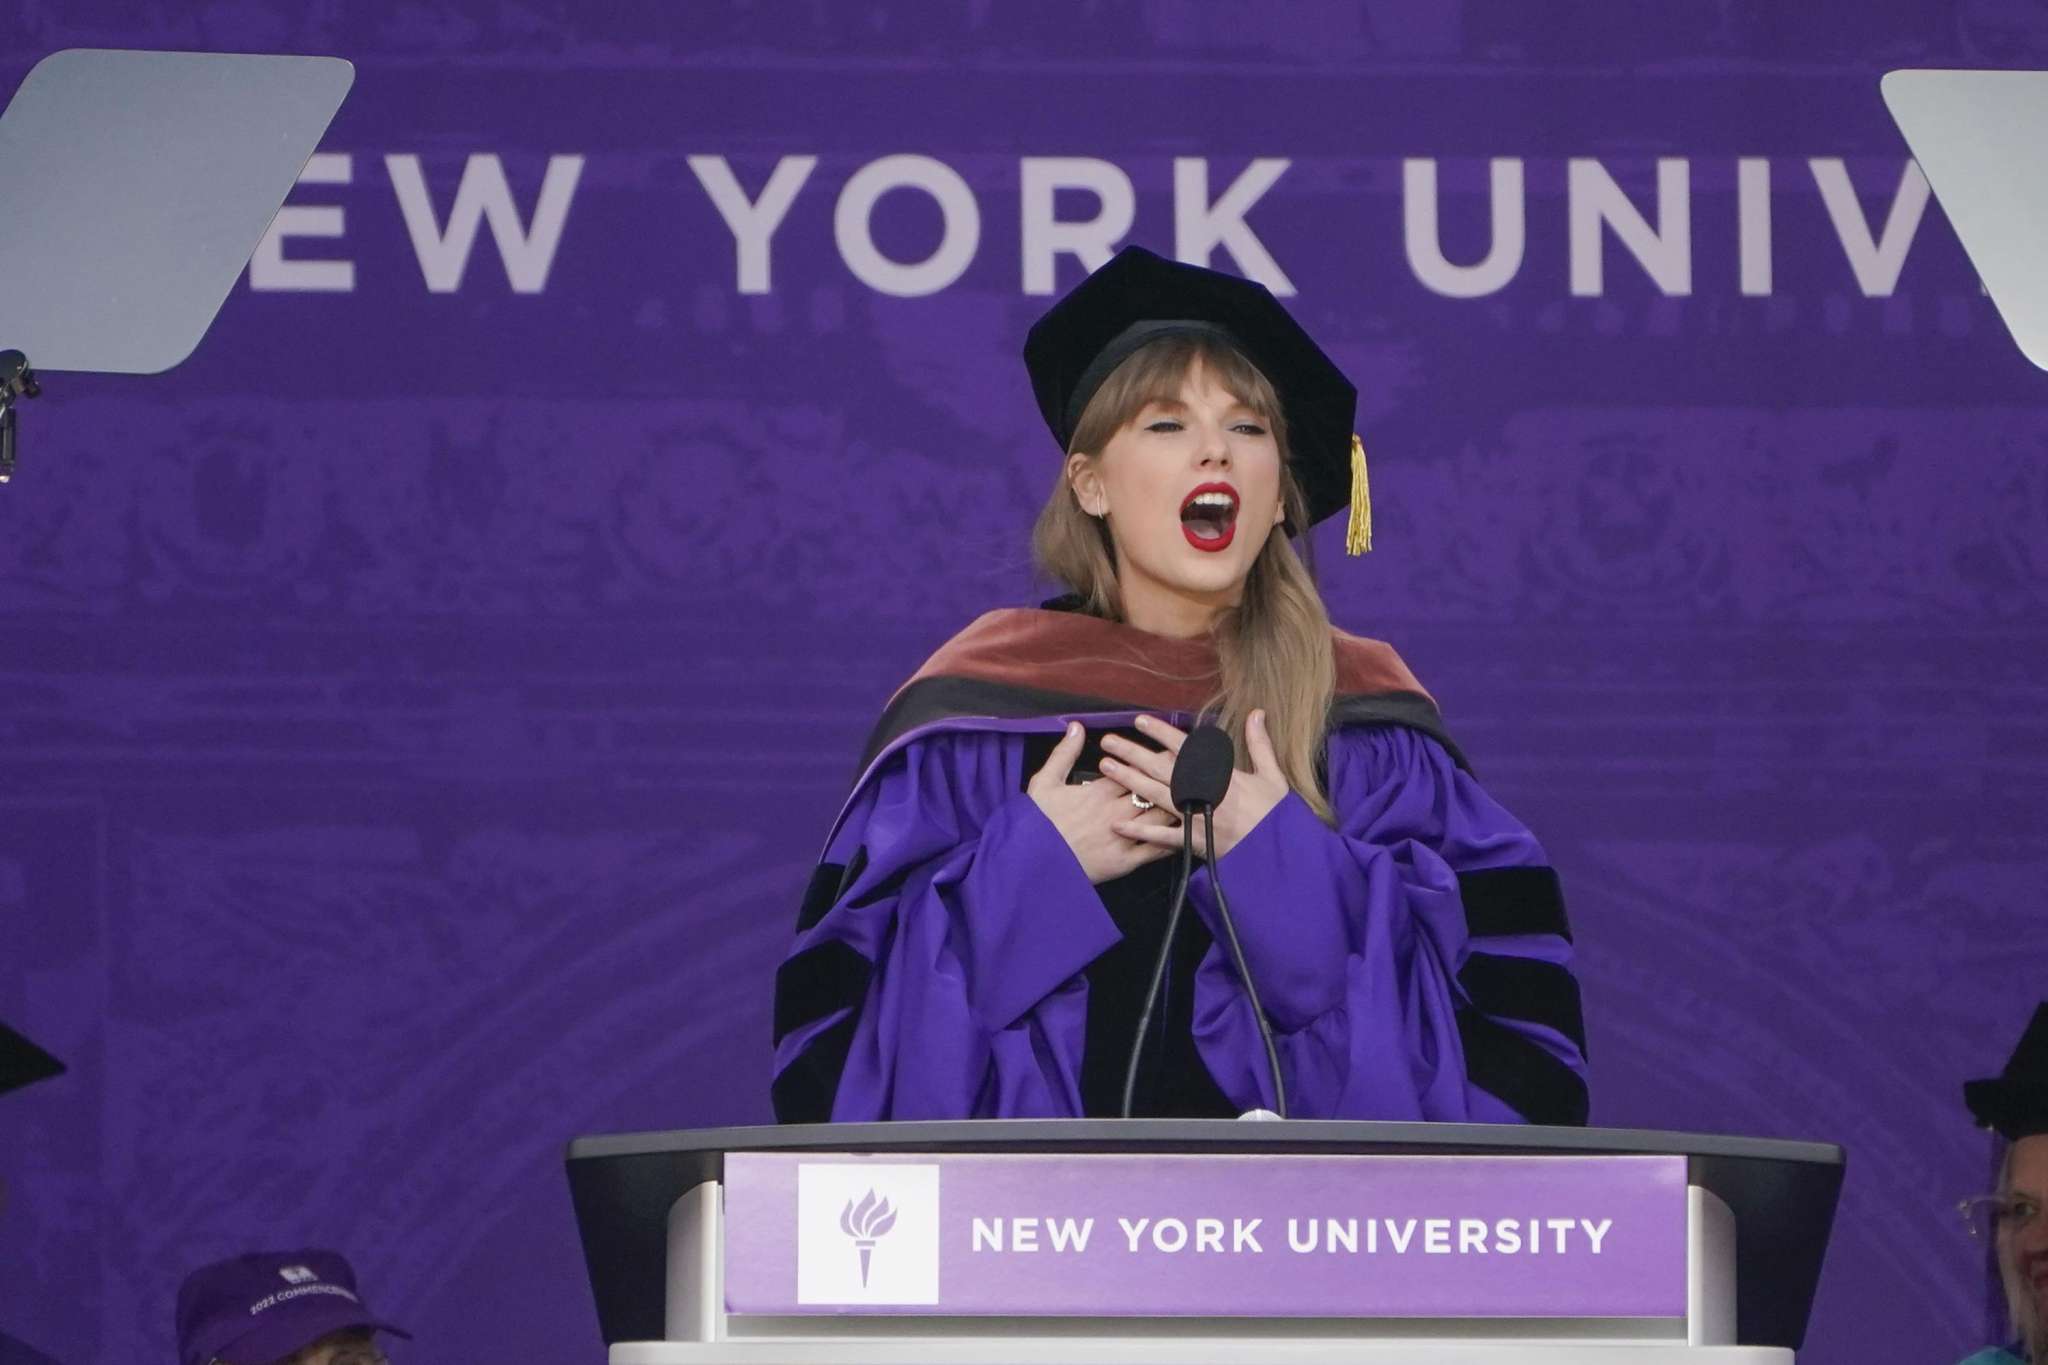 Taylor Swift surprised fans with her transformation into a diligent student